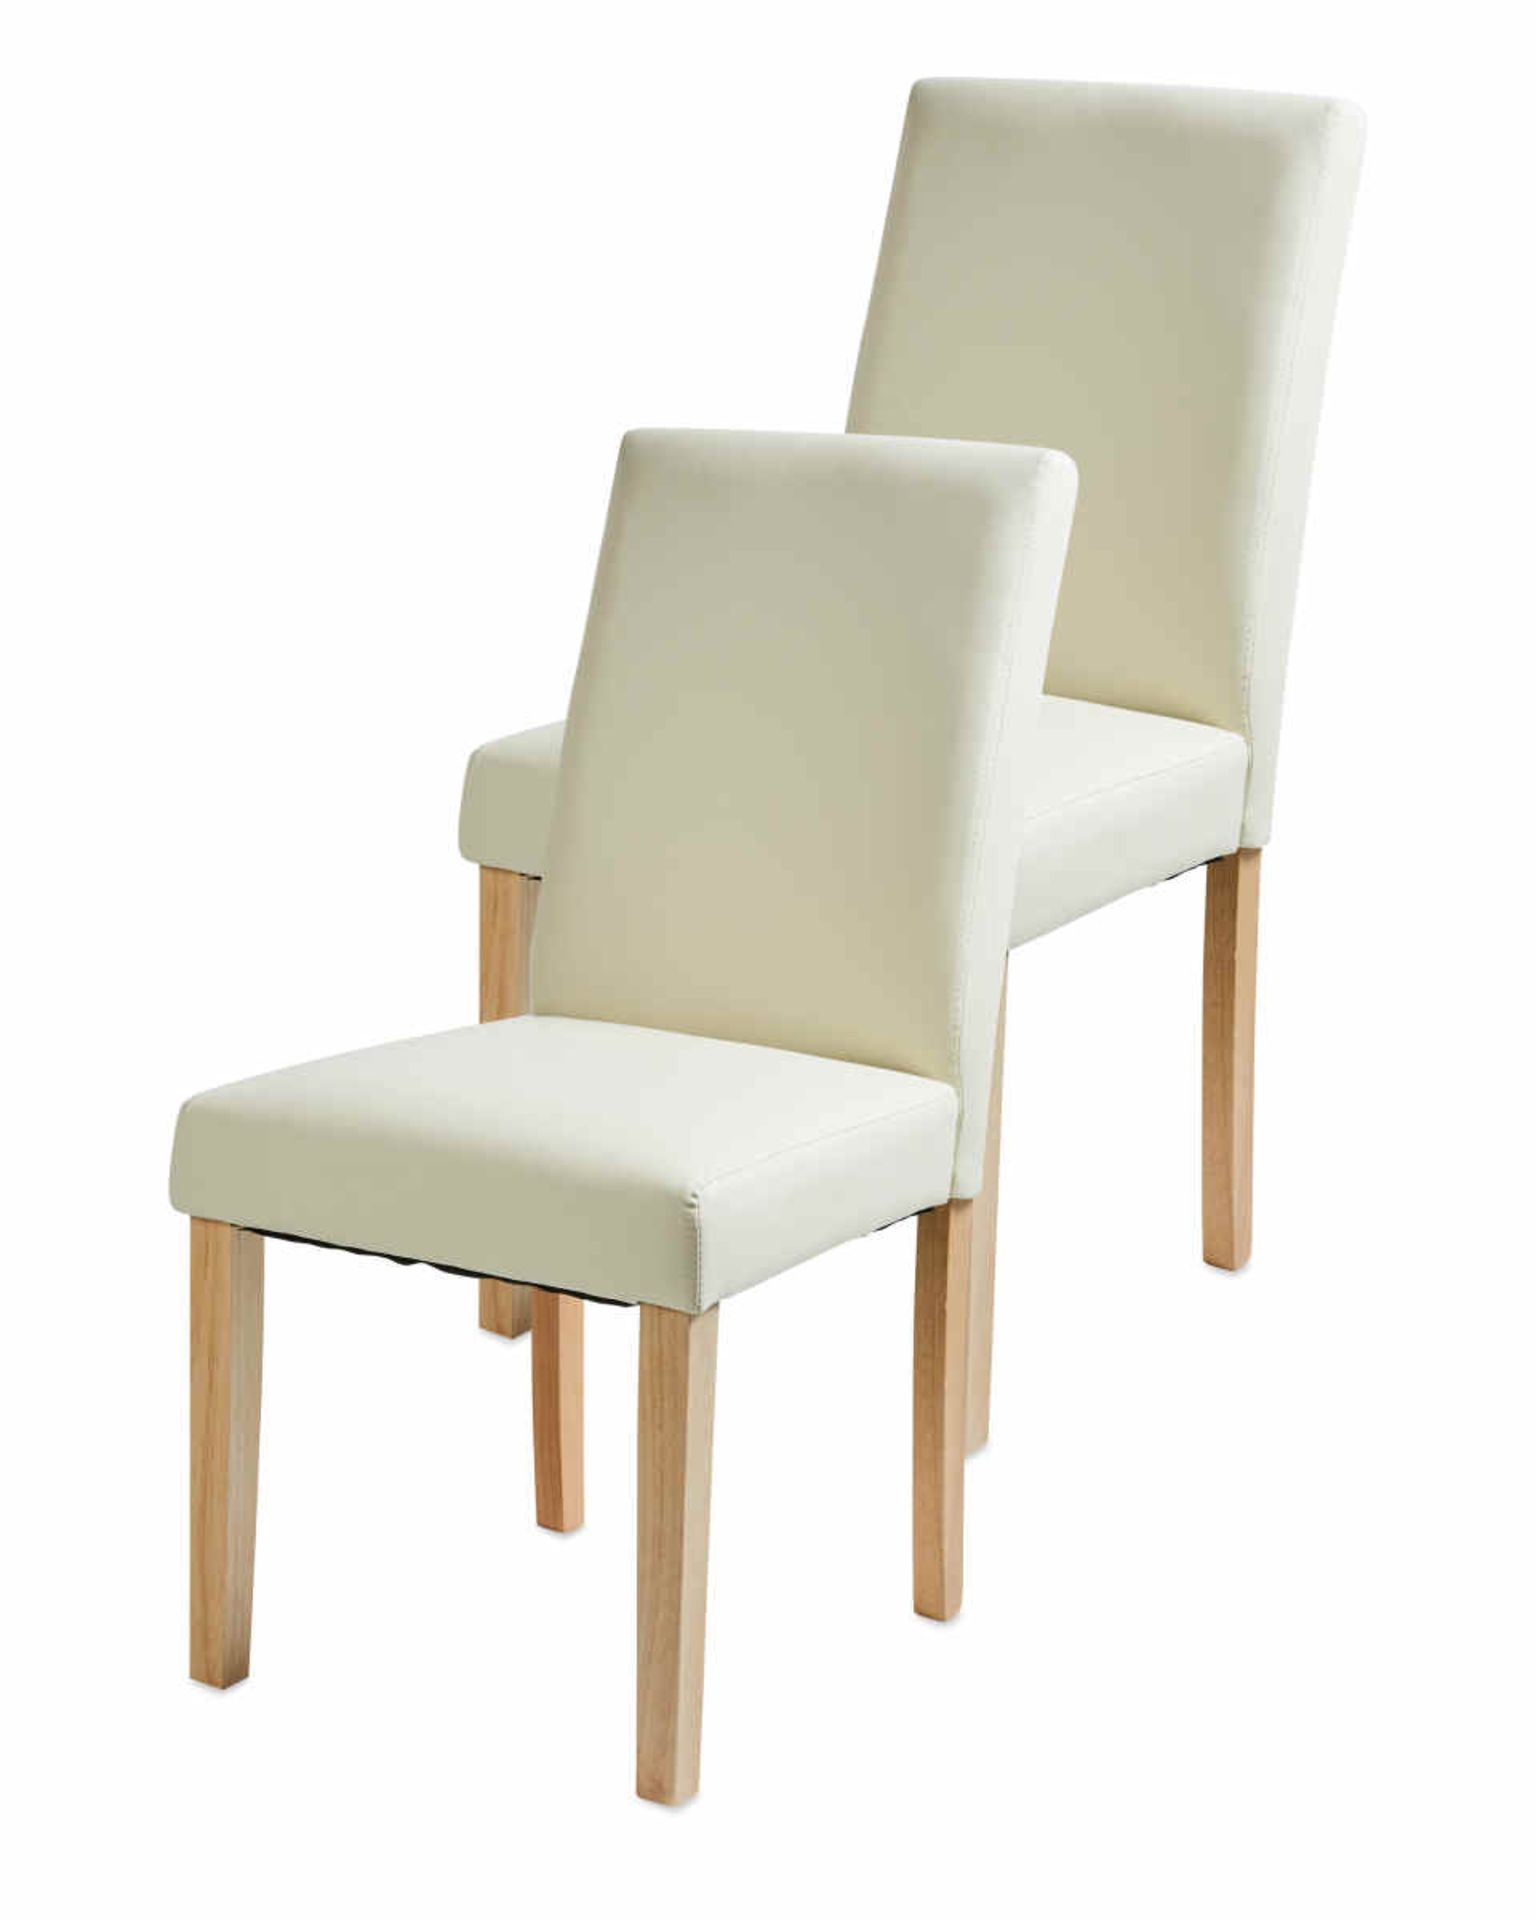 Set of 2 Cream Dining Chairs. Whether you're looking for brand new furniture, or a couple of extra